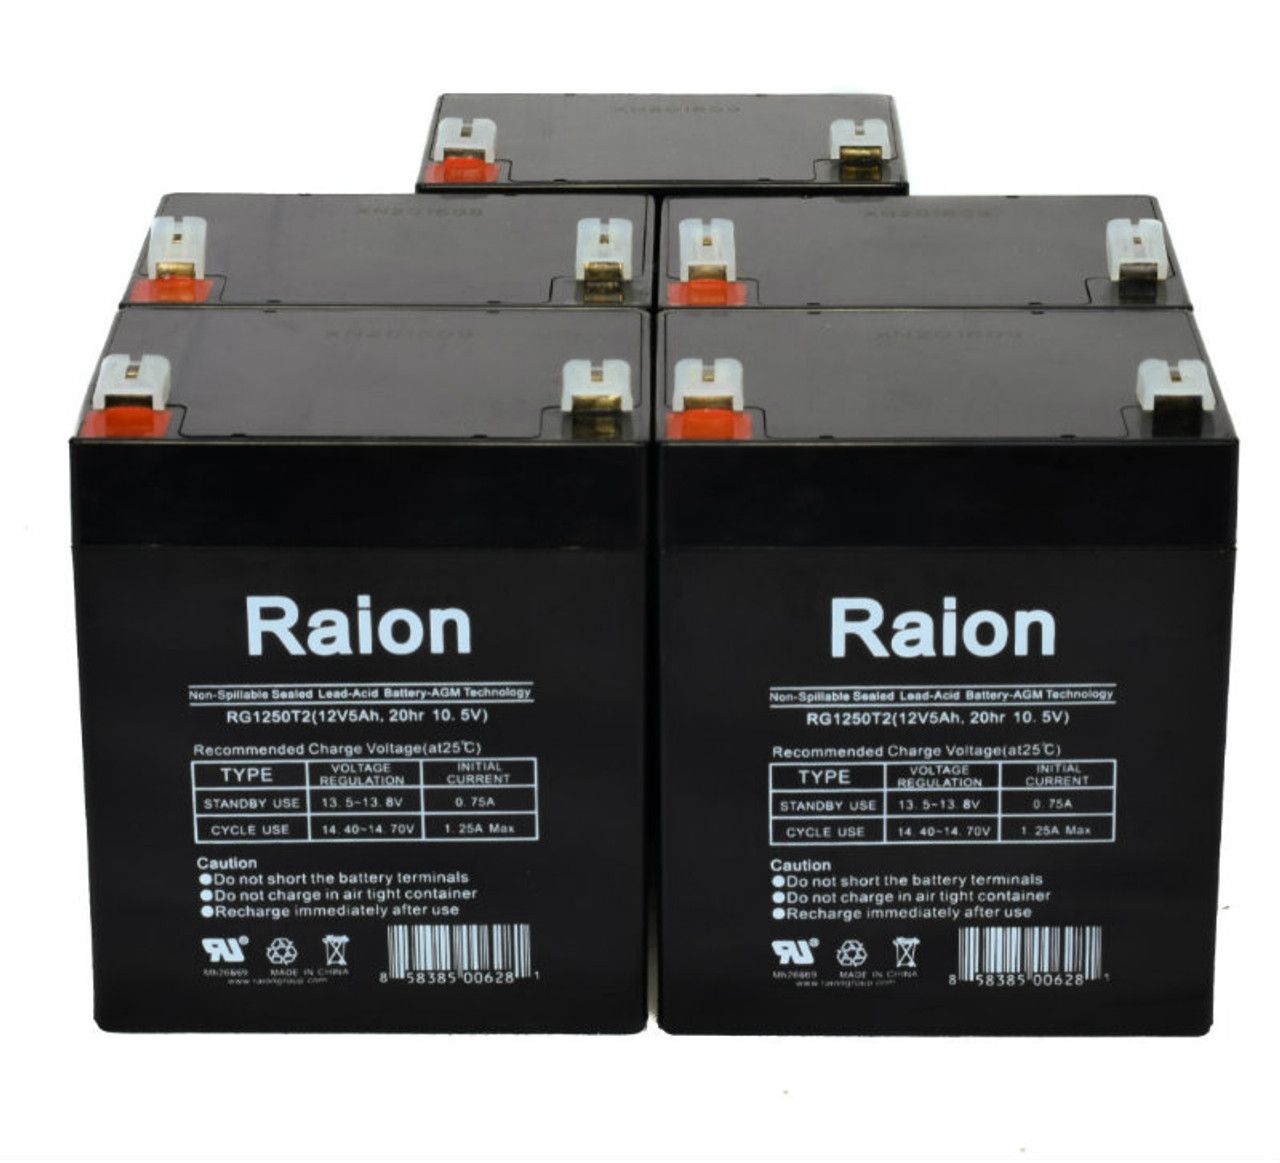 Raion Power RG1250T1 Replacement Battery for Fengri 6-FM-4.0 F1 - (5 Pack)